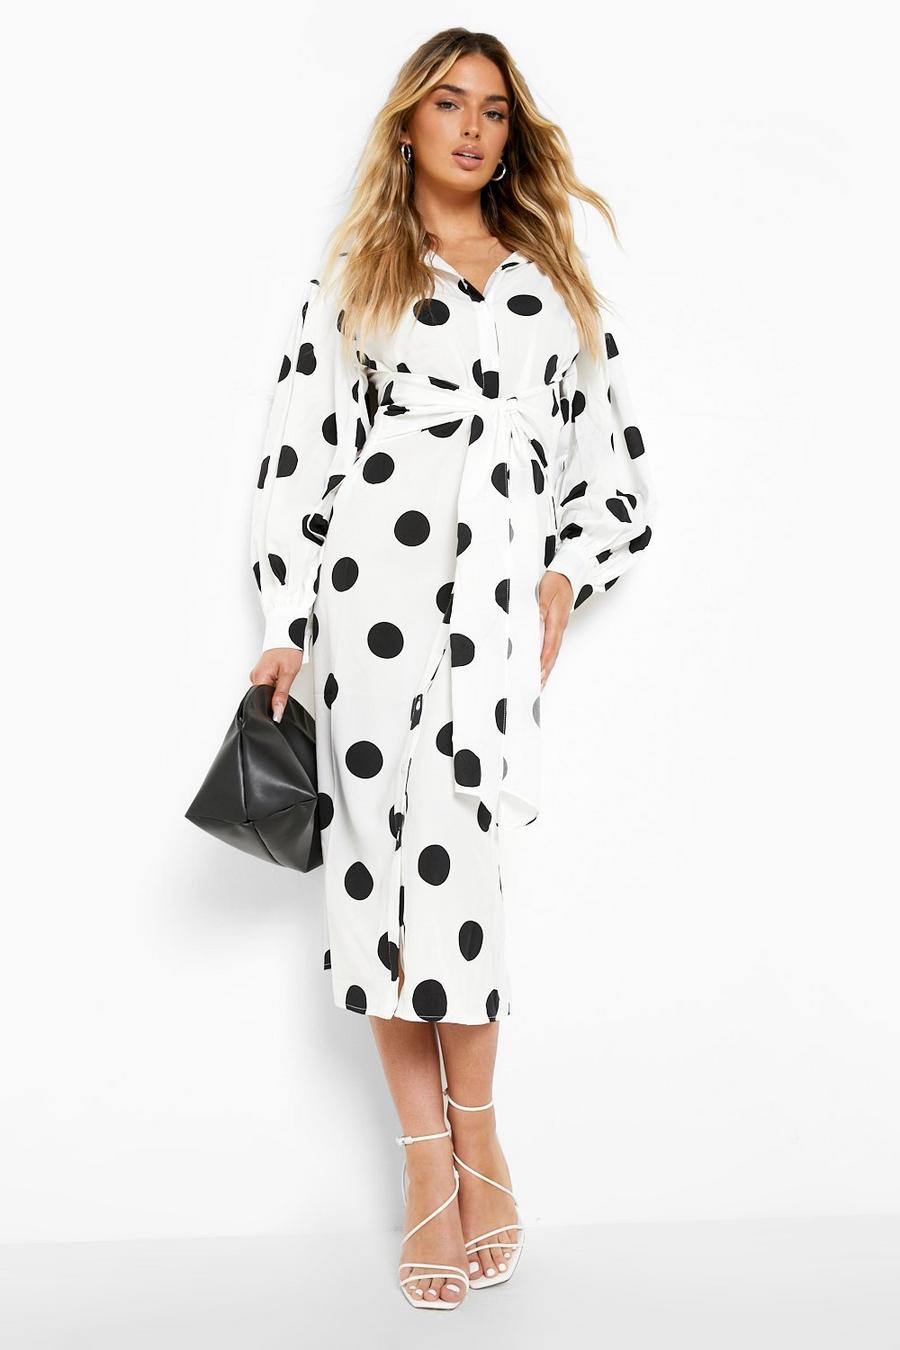 Neuf avec étiquettes BOOHOO Femme Taille 6 Noir Blanc Polka Dot ange manches 3/4 